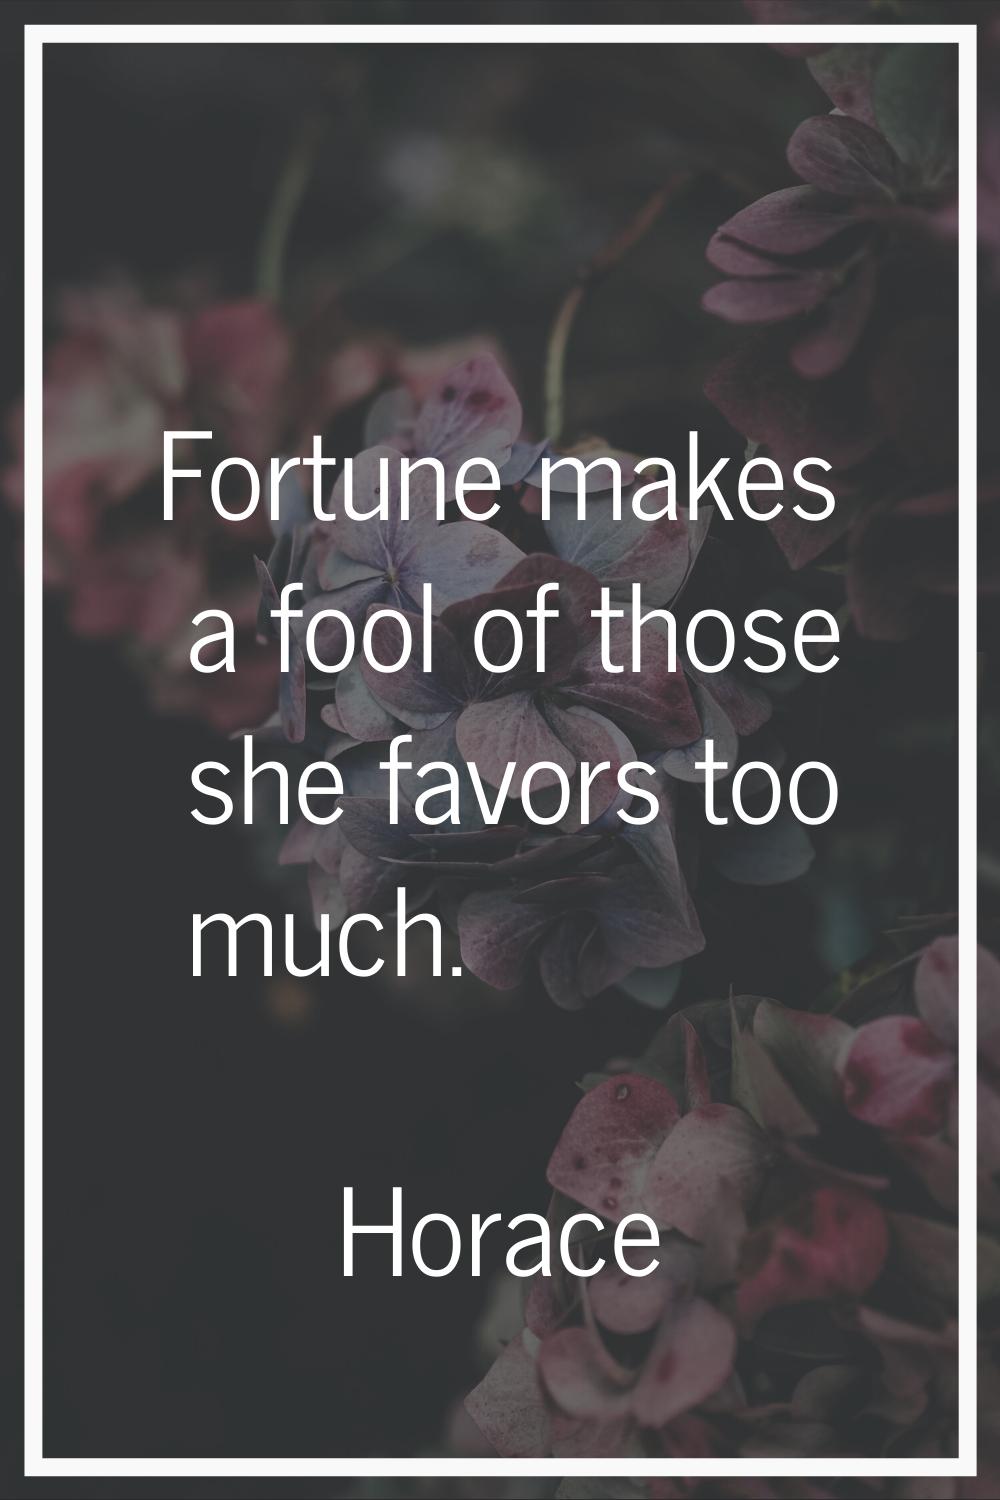 Fortune makes a fool of those she favors too much.